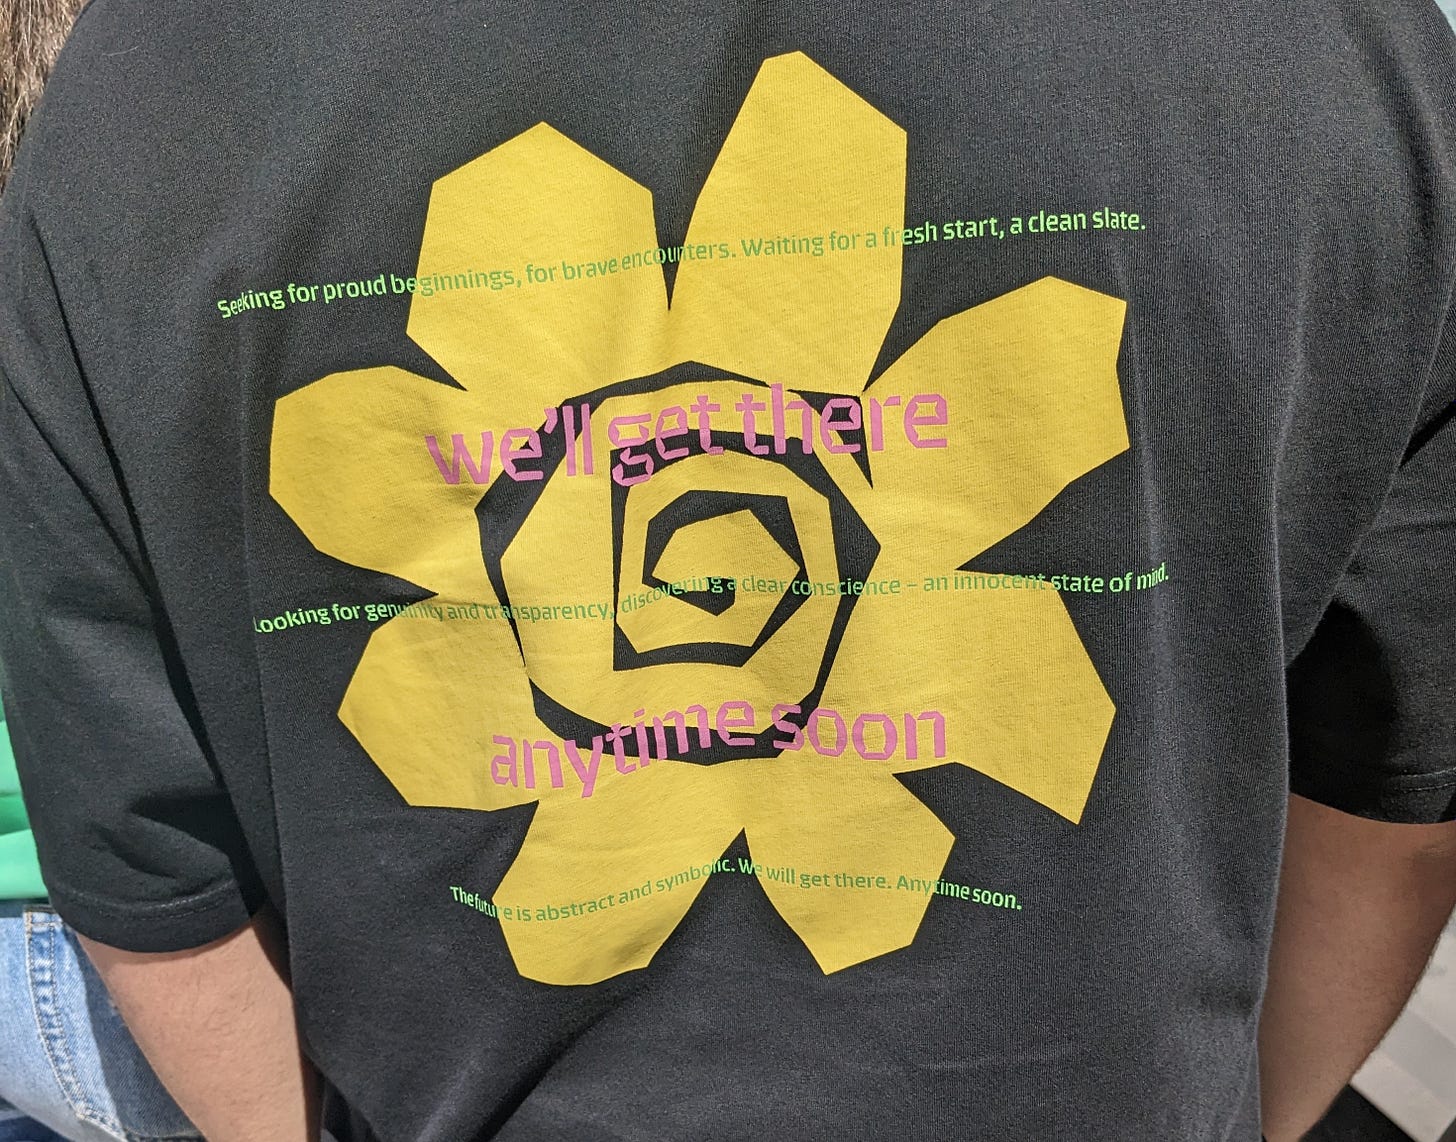 A shirt with a yellow flower and the words Seeking for proud beginnings, for brave encounters.  Waiting for a fresh start, a clean slate.  Looking for genuinity and transparency, discovering a clear conscience – an innocent state of mind.  The future is abstract and symbolic. We will get there. Anytime soon.